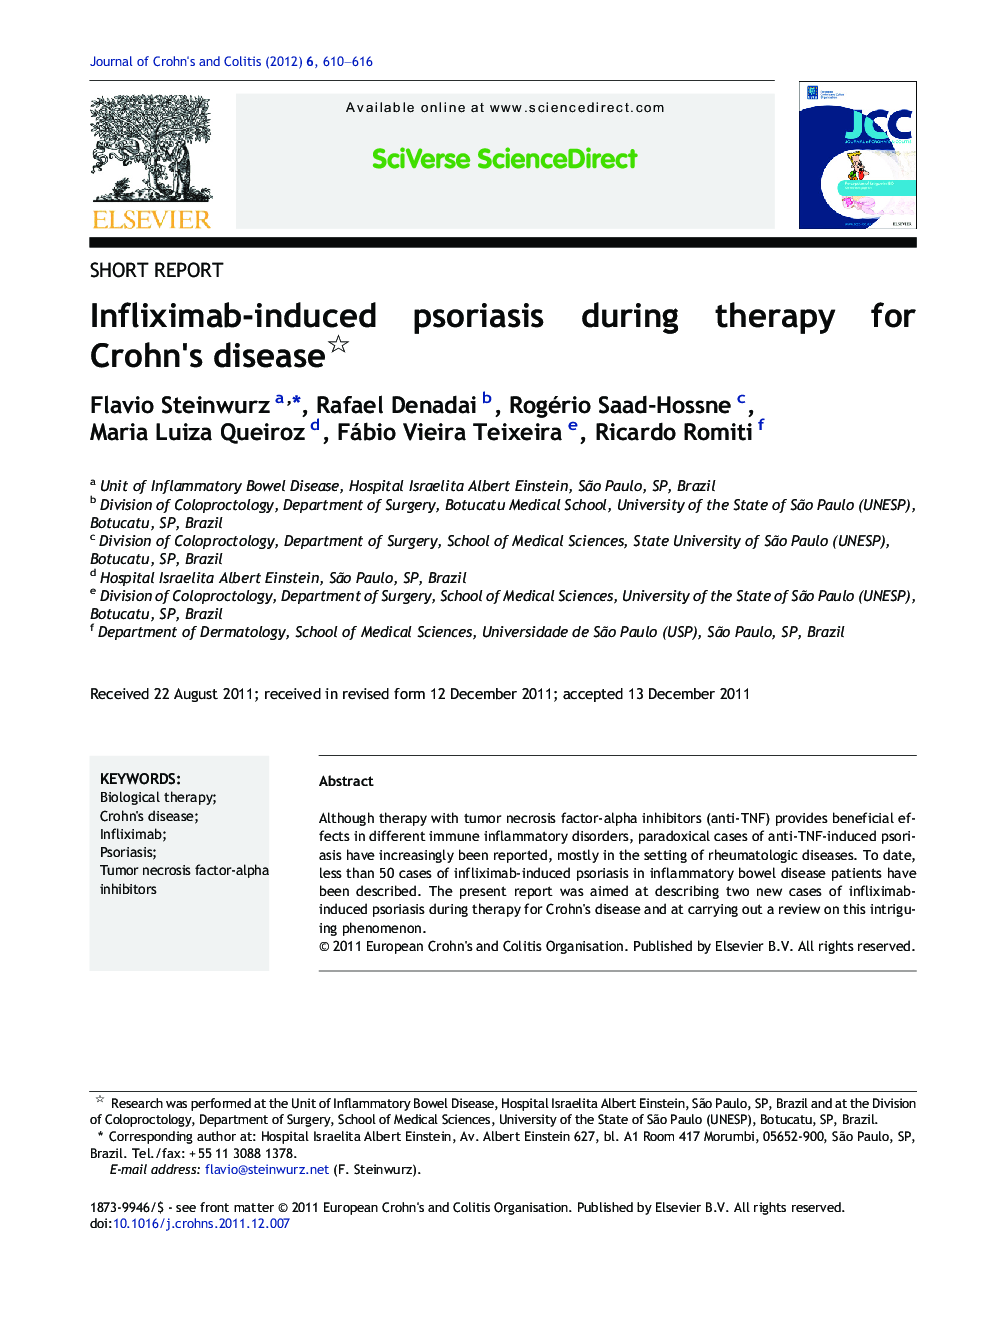 Infliximab-induced psoriasis during therapy for Crohn's disease